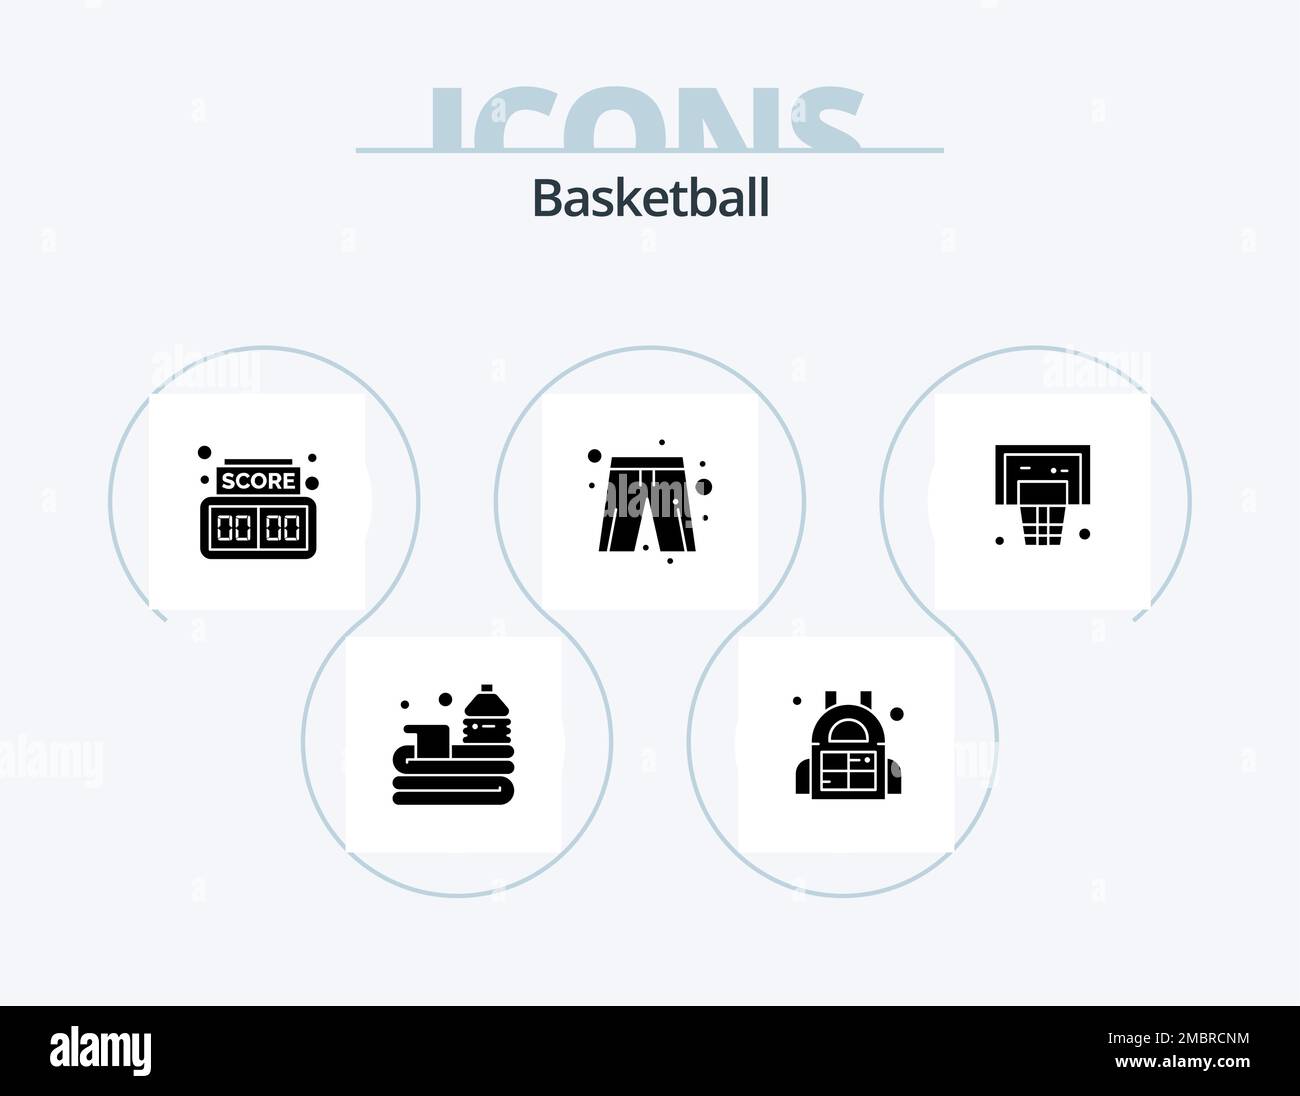 Basketball Glyph Icon Pack 5 Icon Design. hoop. basket. board. player dress. clothes Stock Vector